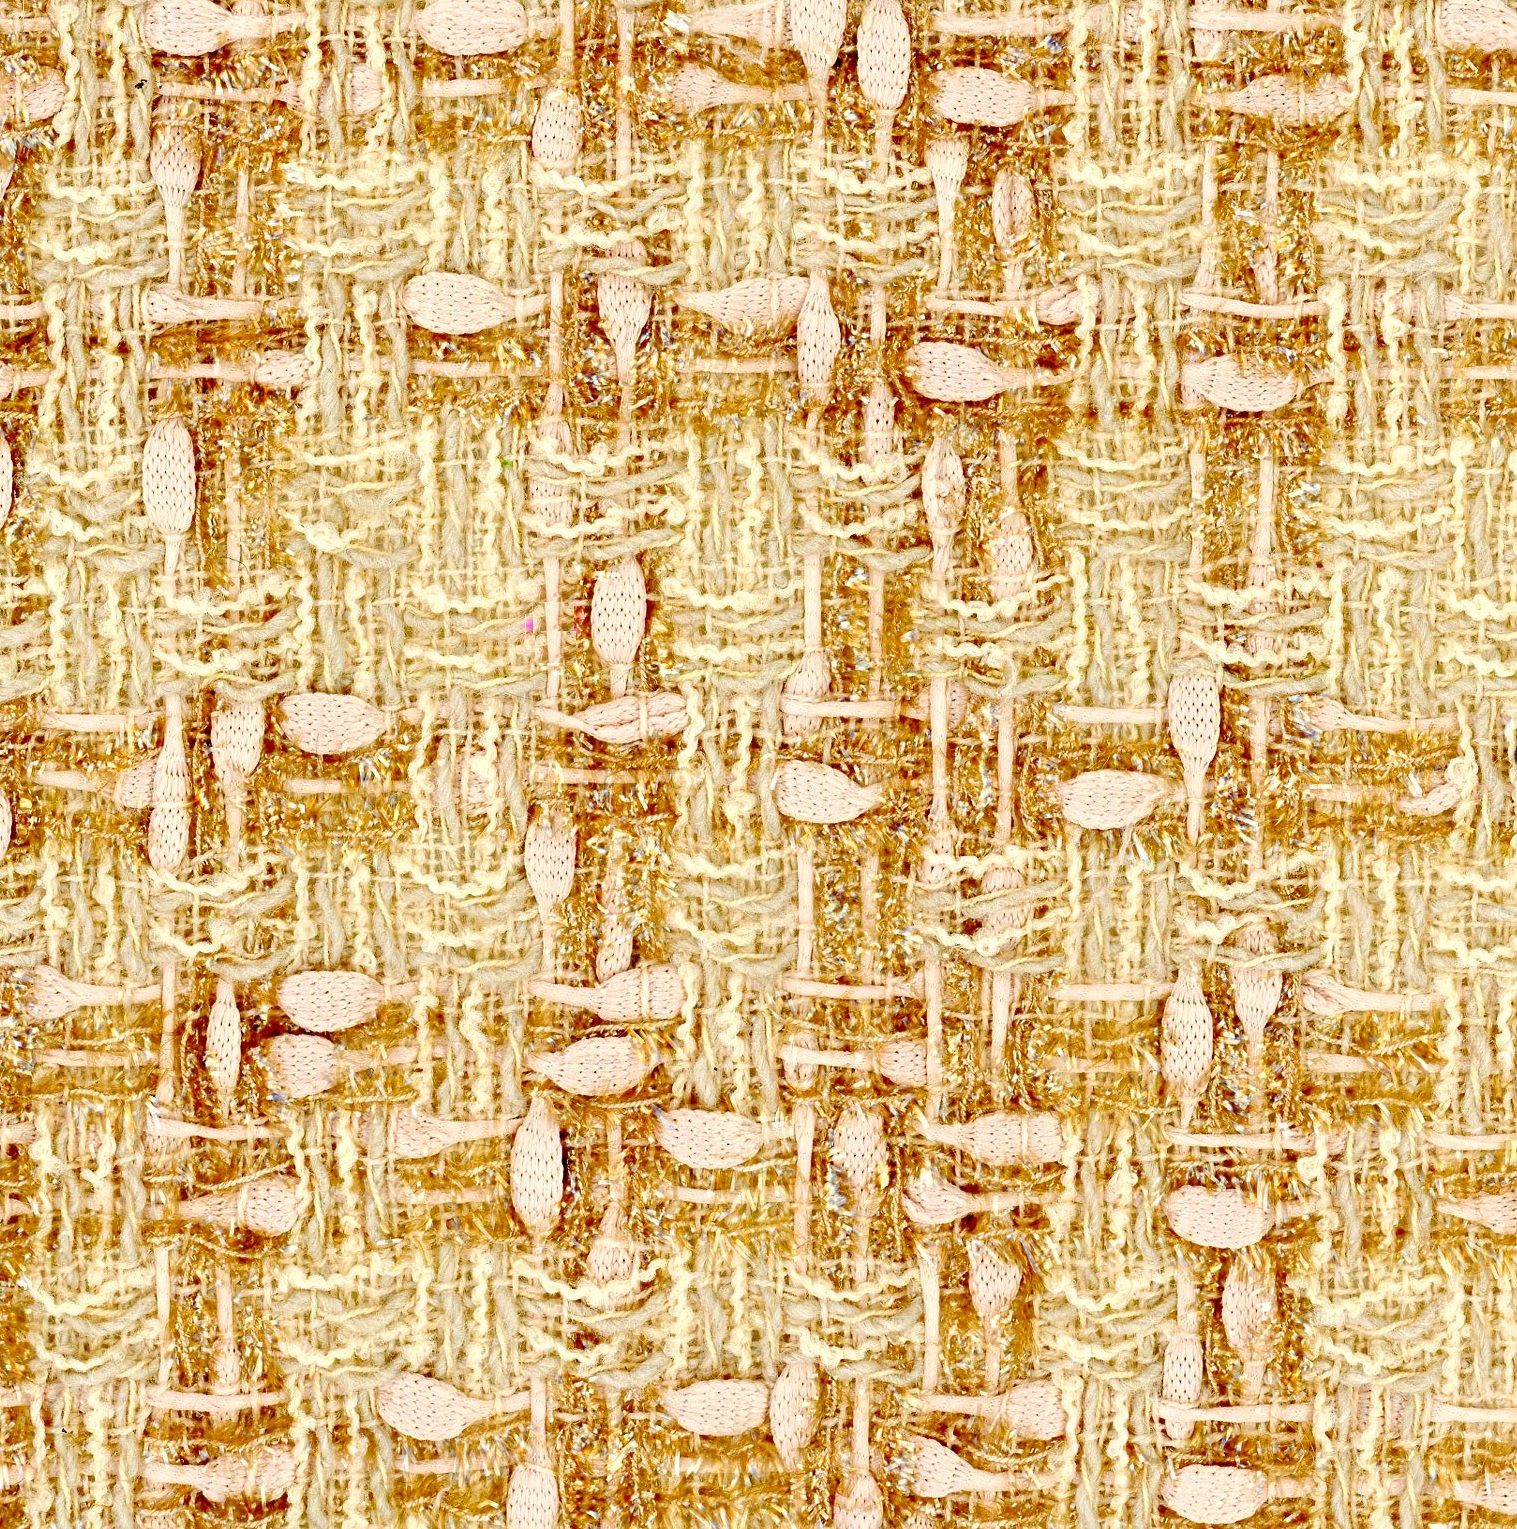 XX31004 – Shades of Pastel Peach and Shiny Camel Couture Textured Fabric